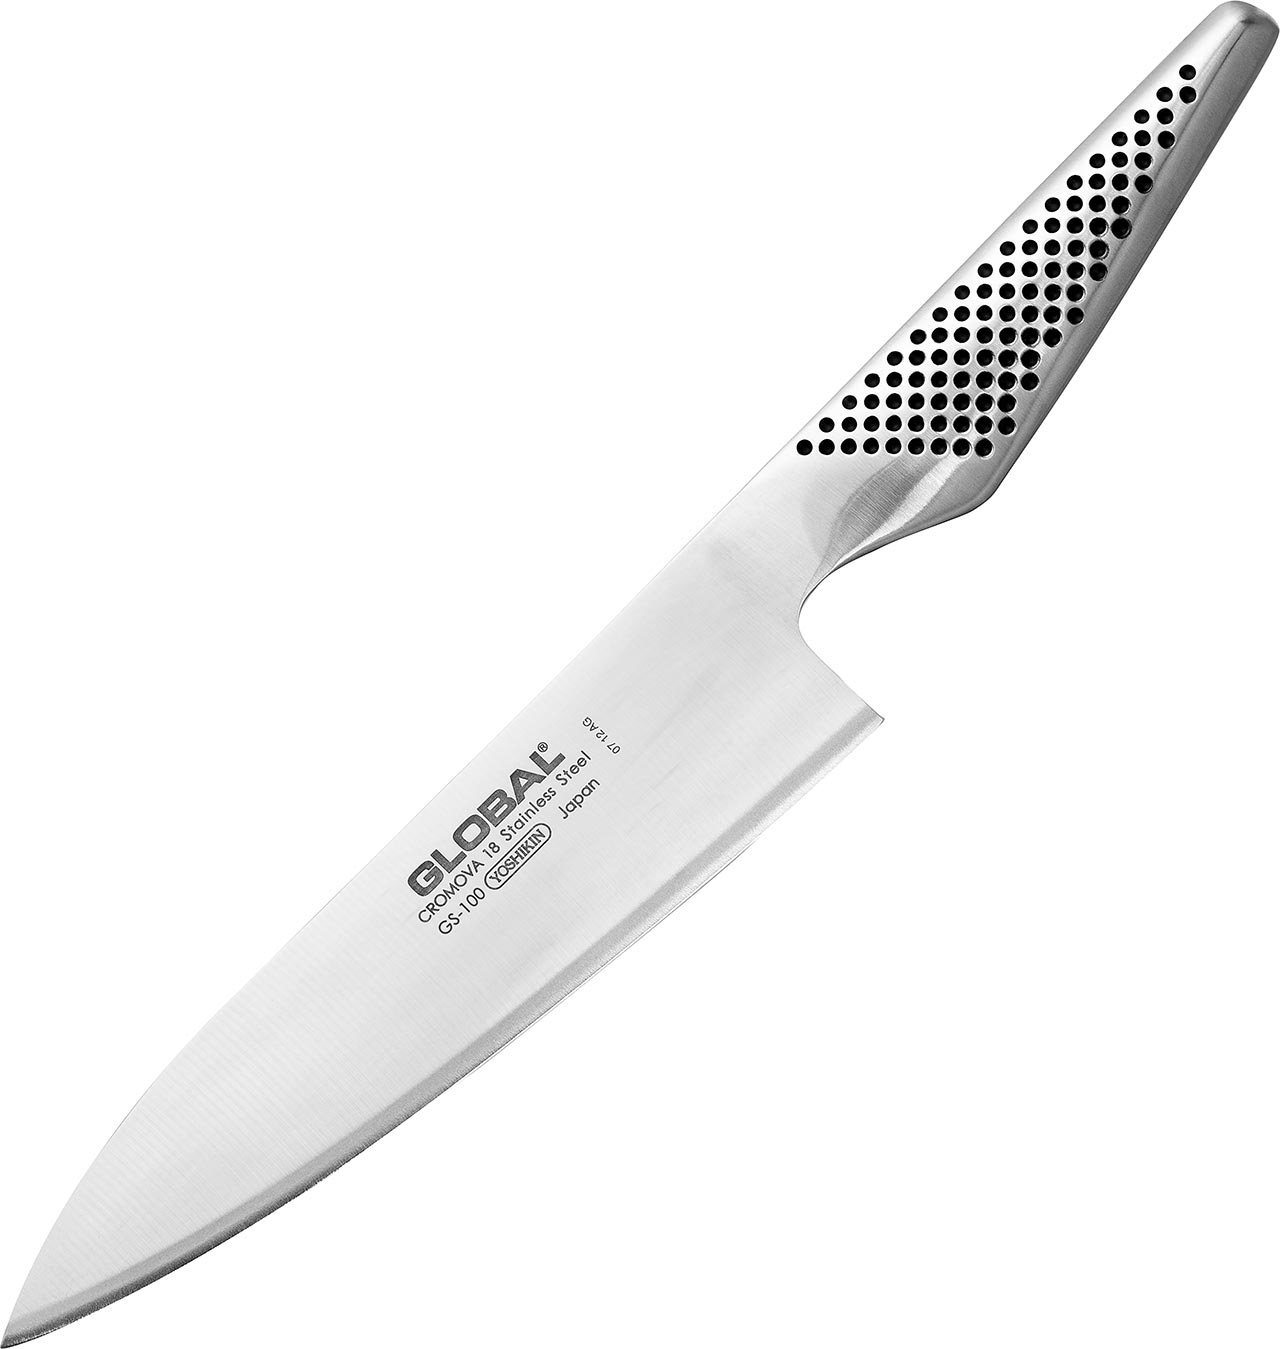 Global Cook's Knife GS-3